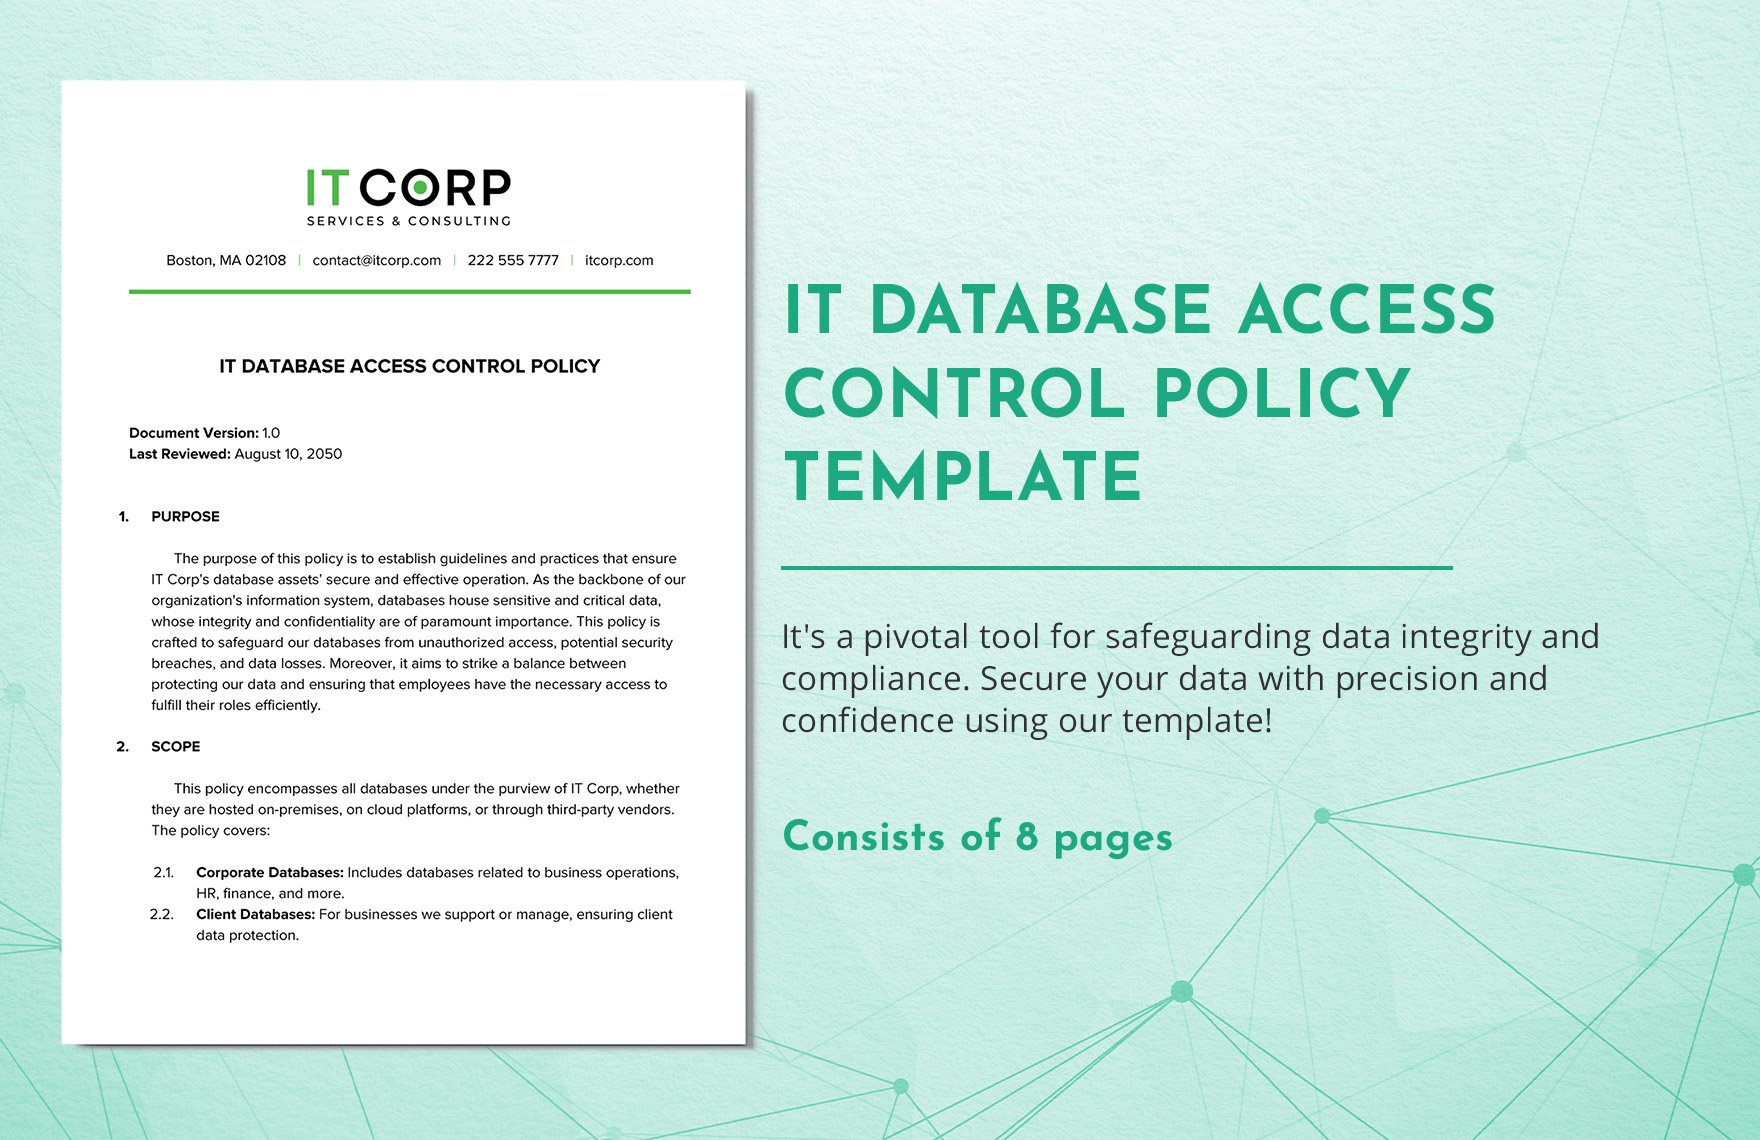 IT Database Access Control Policy Template